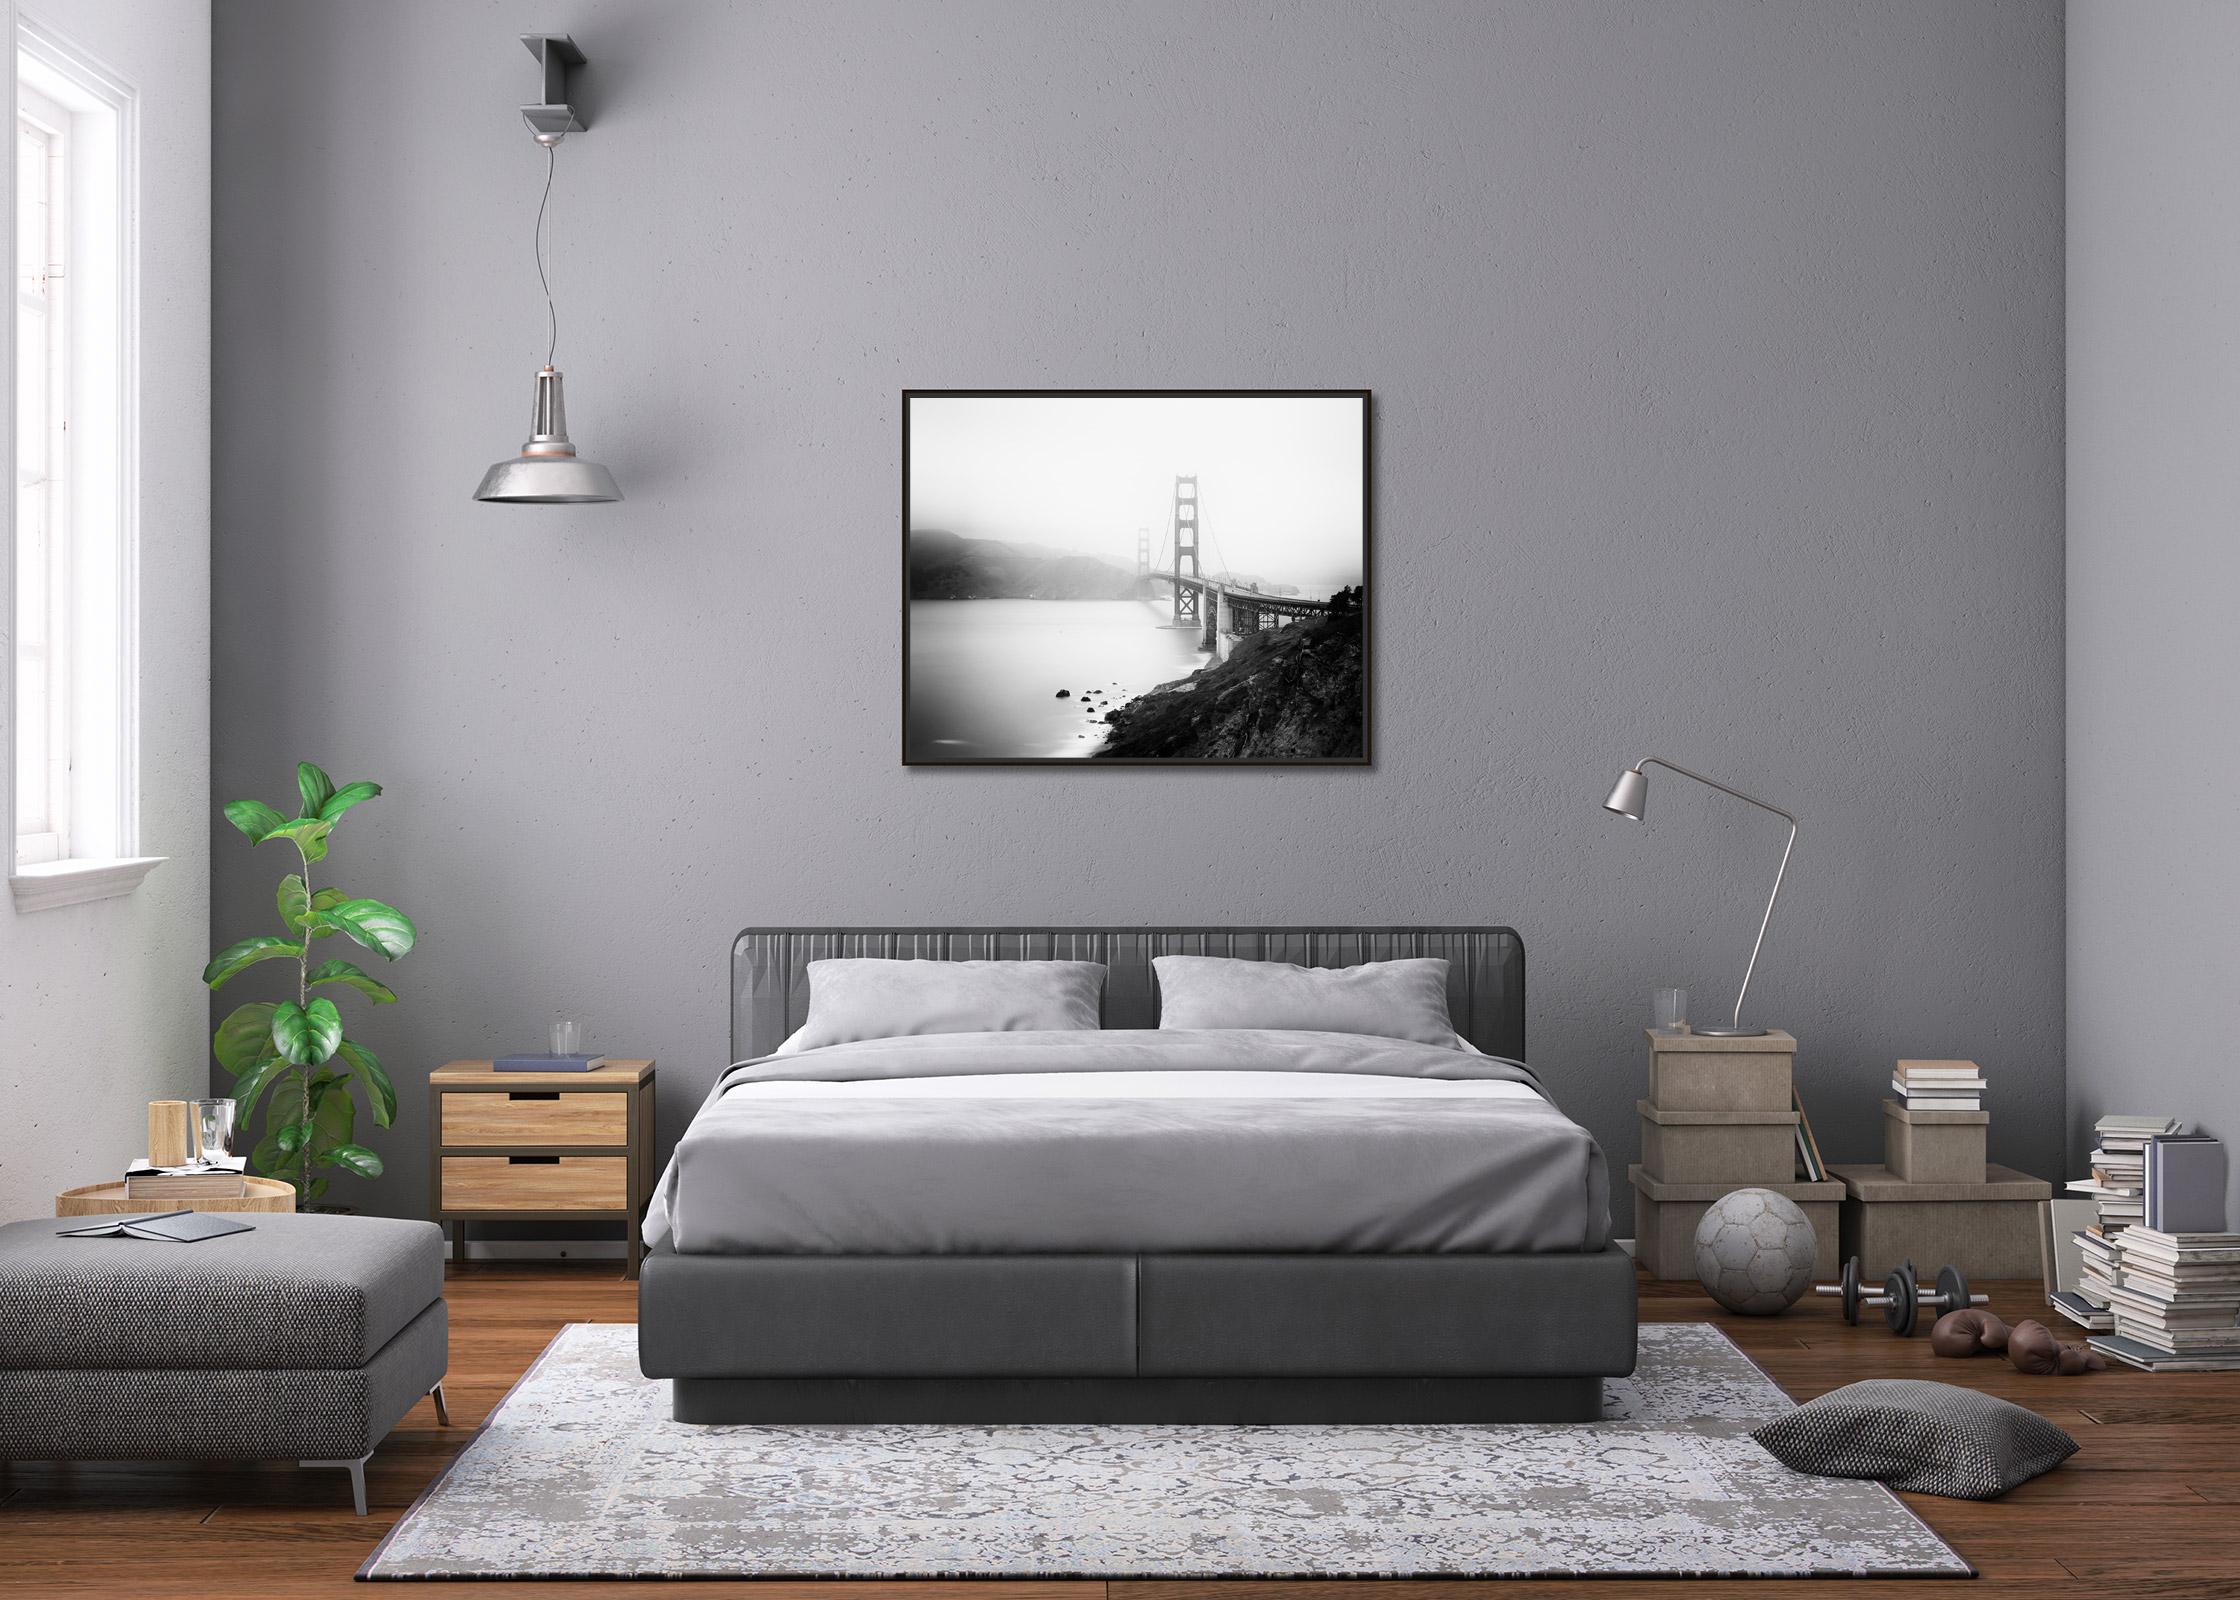 Black and White Fine Art long exposure landscape photography. Archival pigment ink print, edition of 7. Signed, titled, dated and numbered by artist. Certificate of authenticity included. Printed with 4cm white border. International award winner